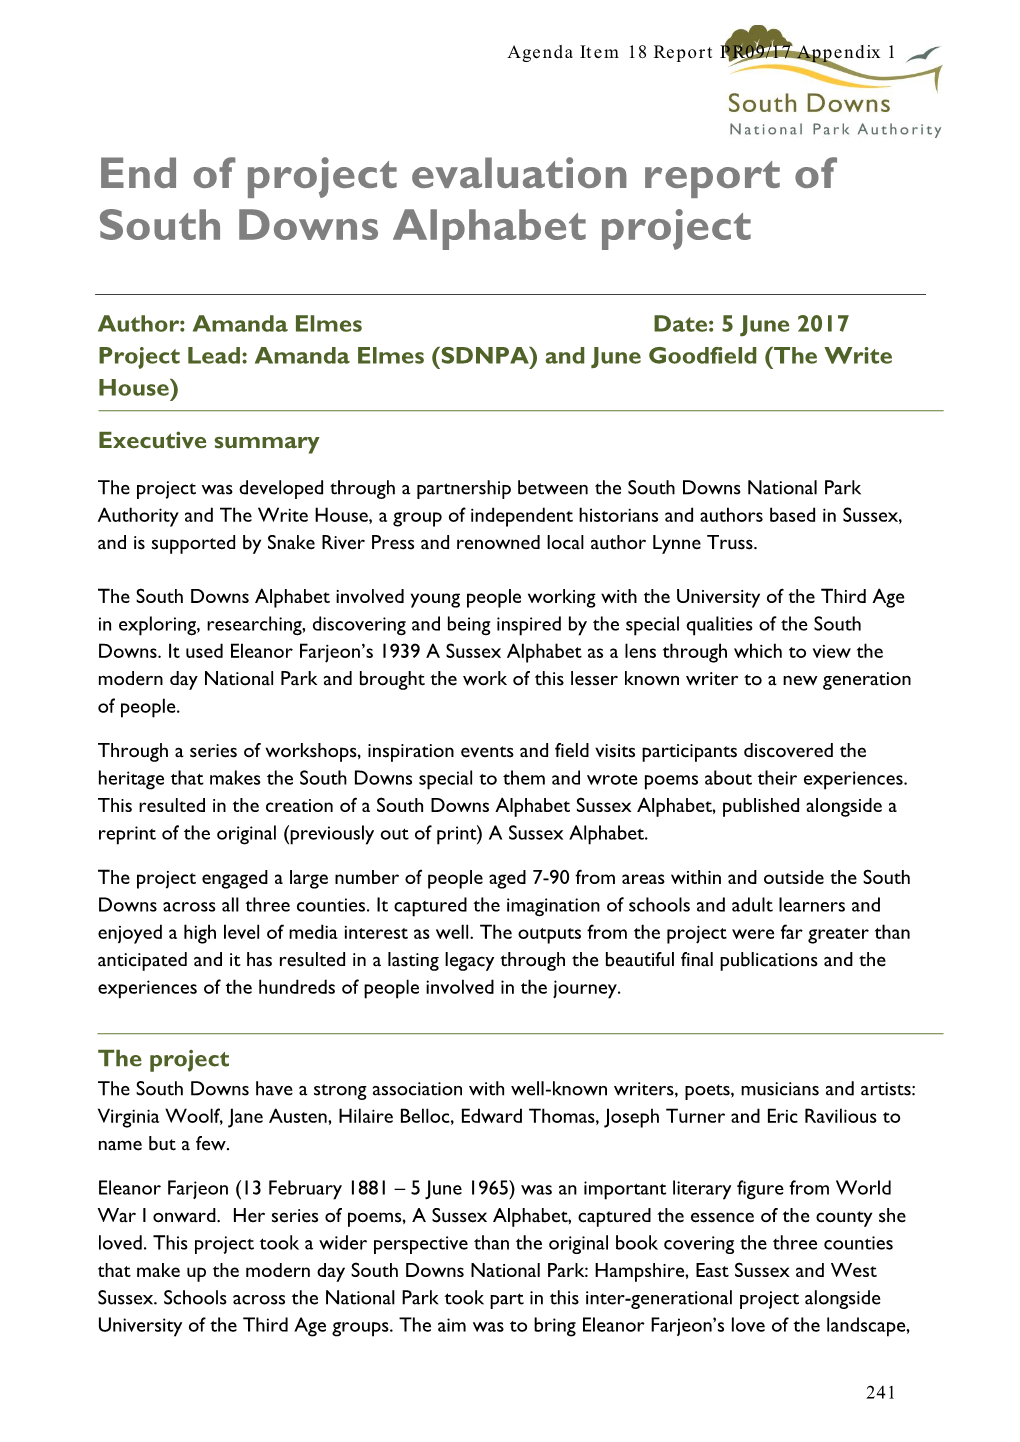 End of Project Evaluation Report of South Downs Alphabet Project